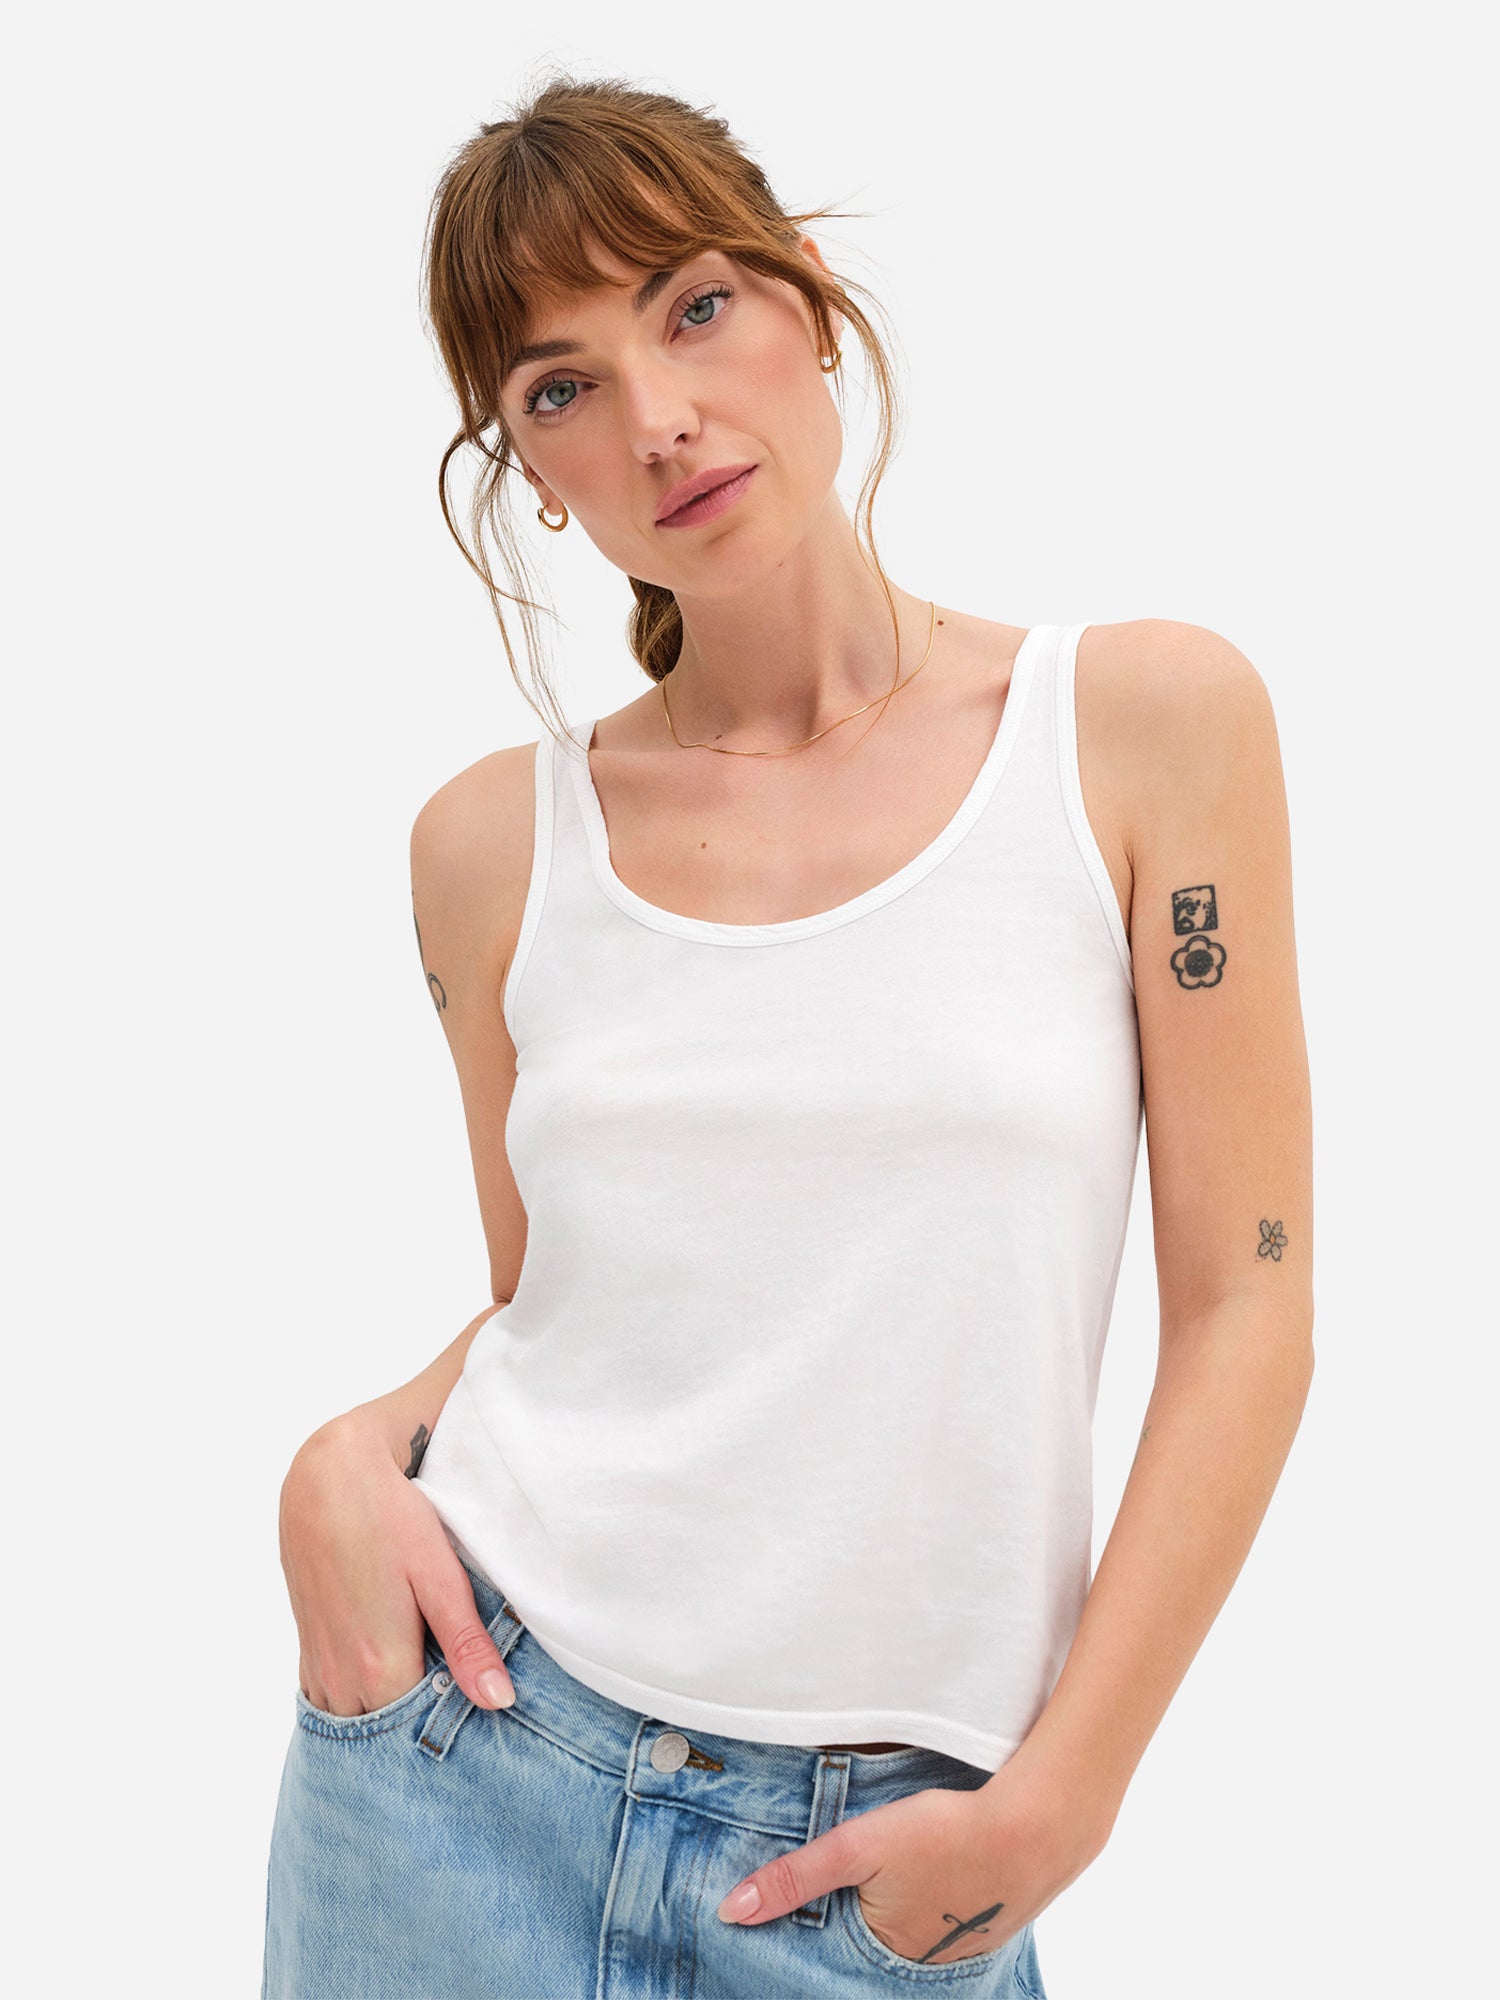 Comfortable and Stylish Organic Cotton Camisole Tank Top for Women